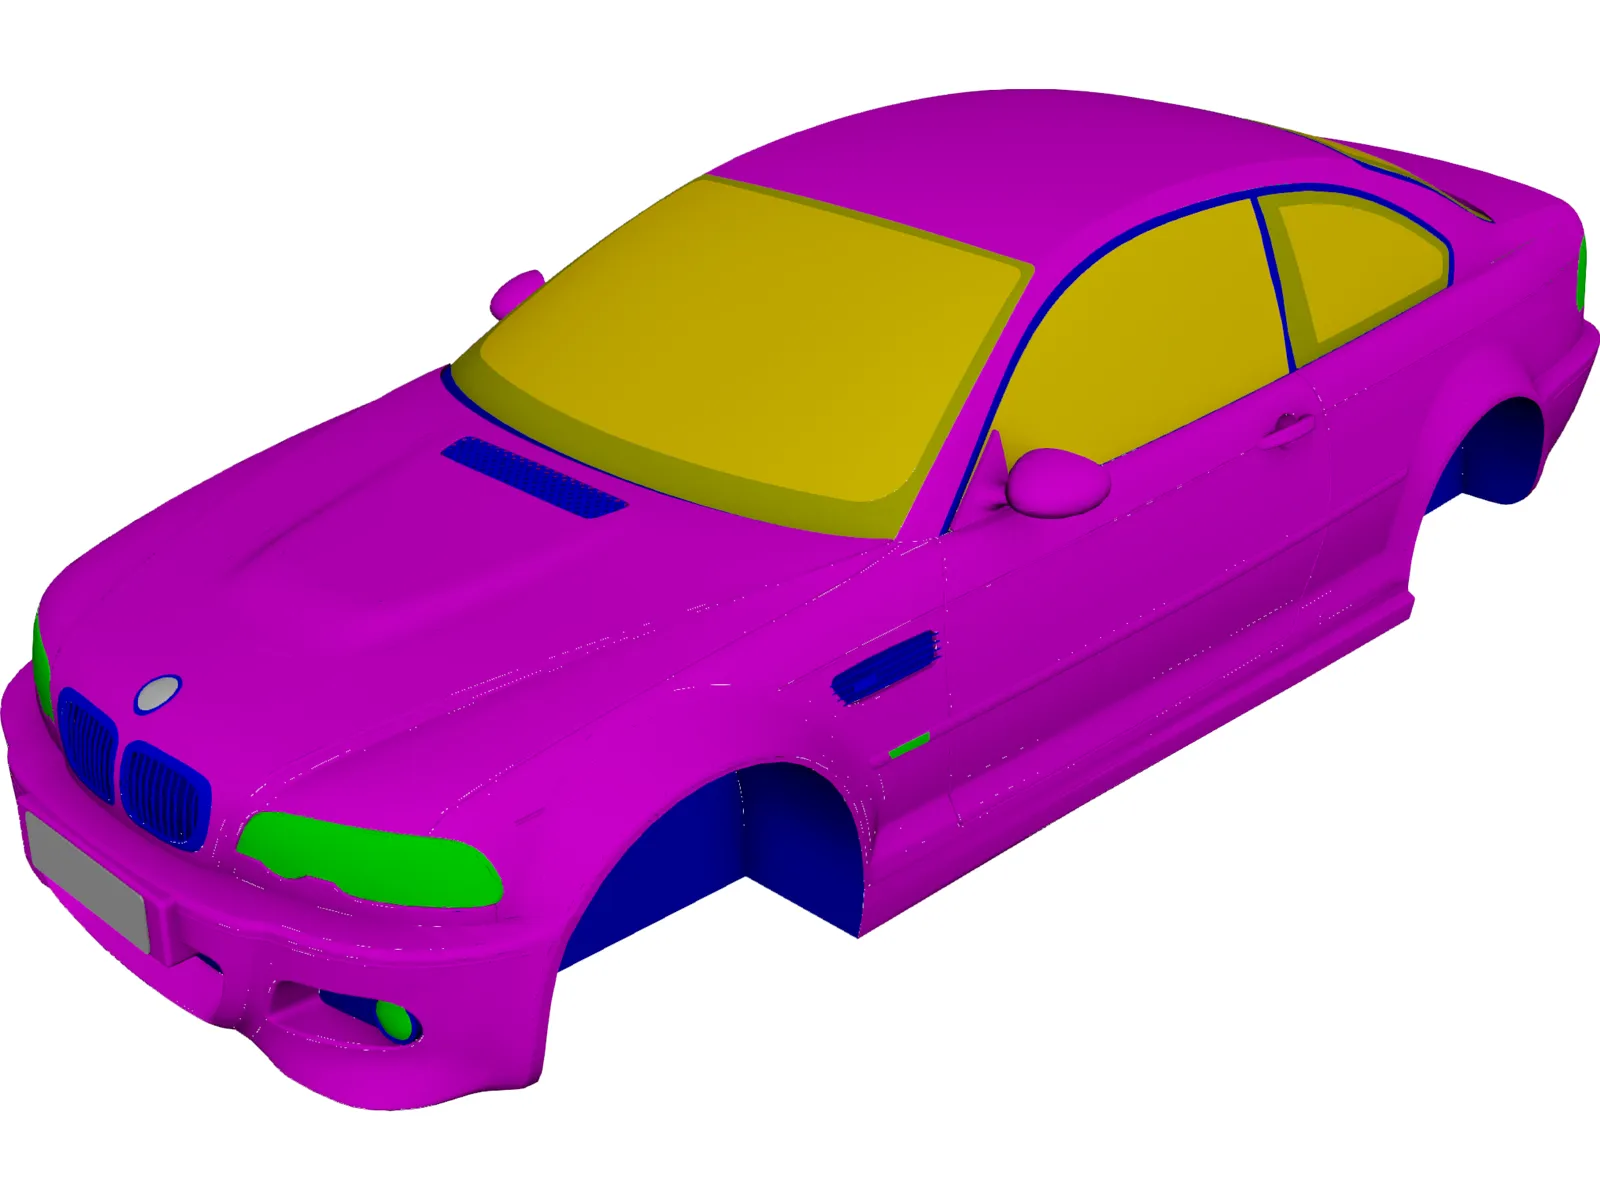 how to download the cad solidworks models of bmw m3